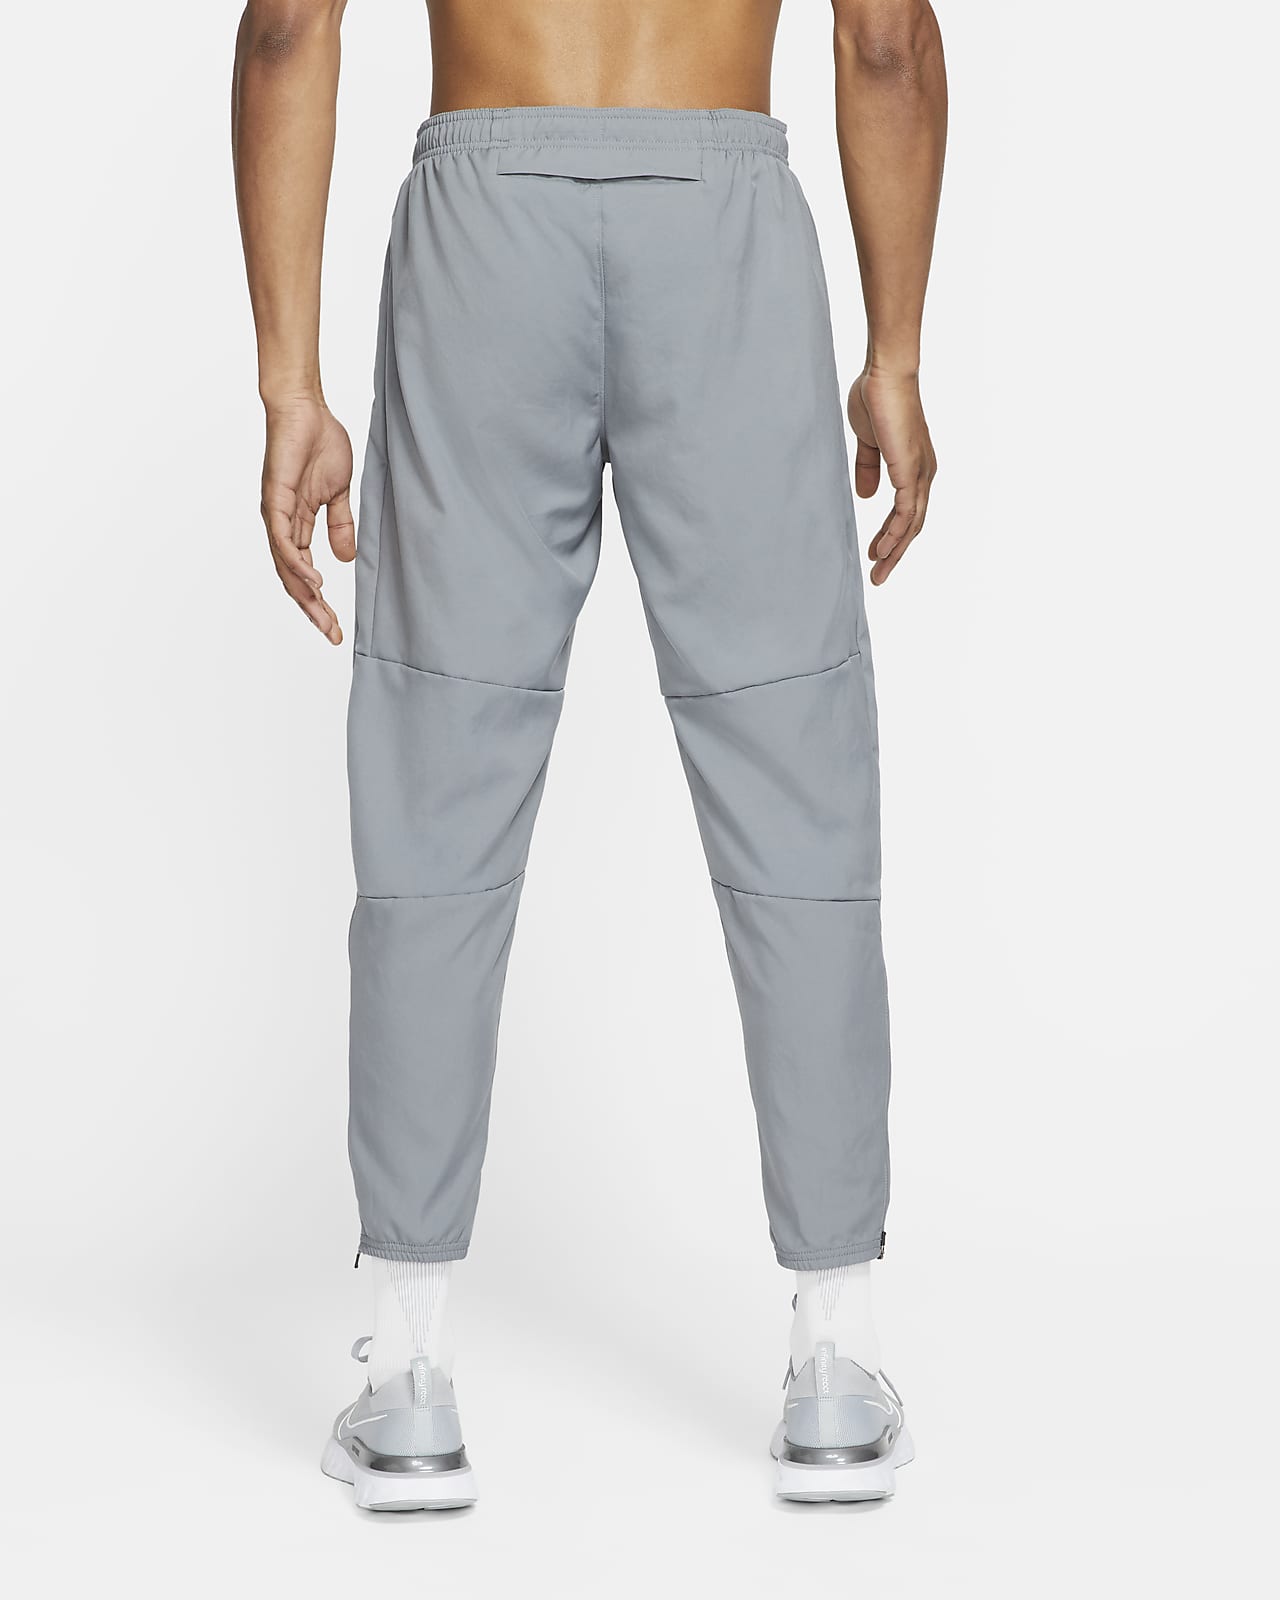 Nike Dry Fit Tracksuit Pants, Men's Fashion, Activewear on Carousell